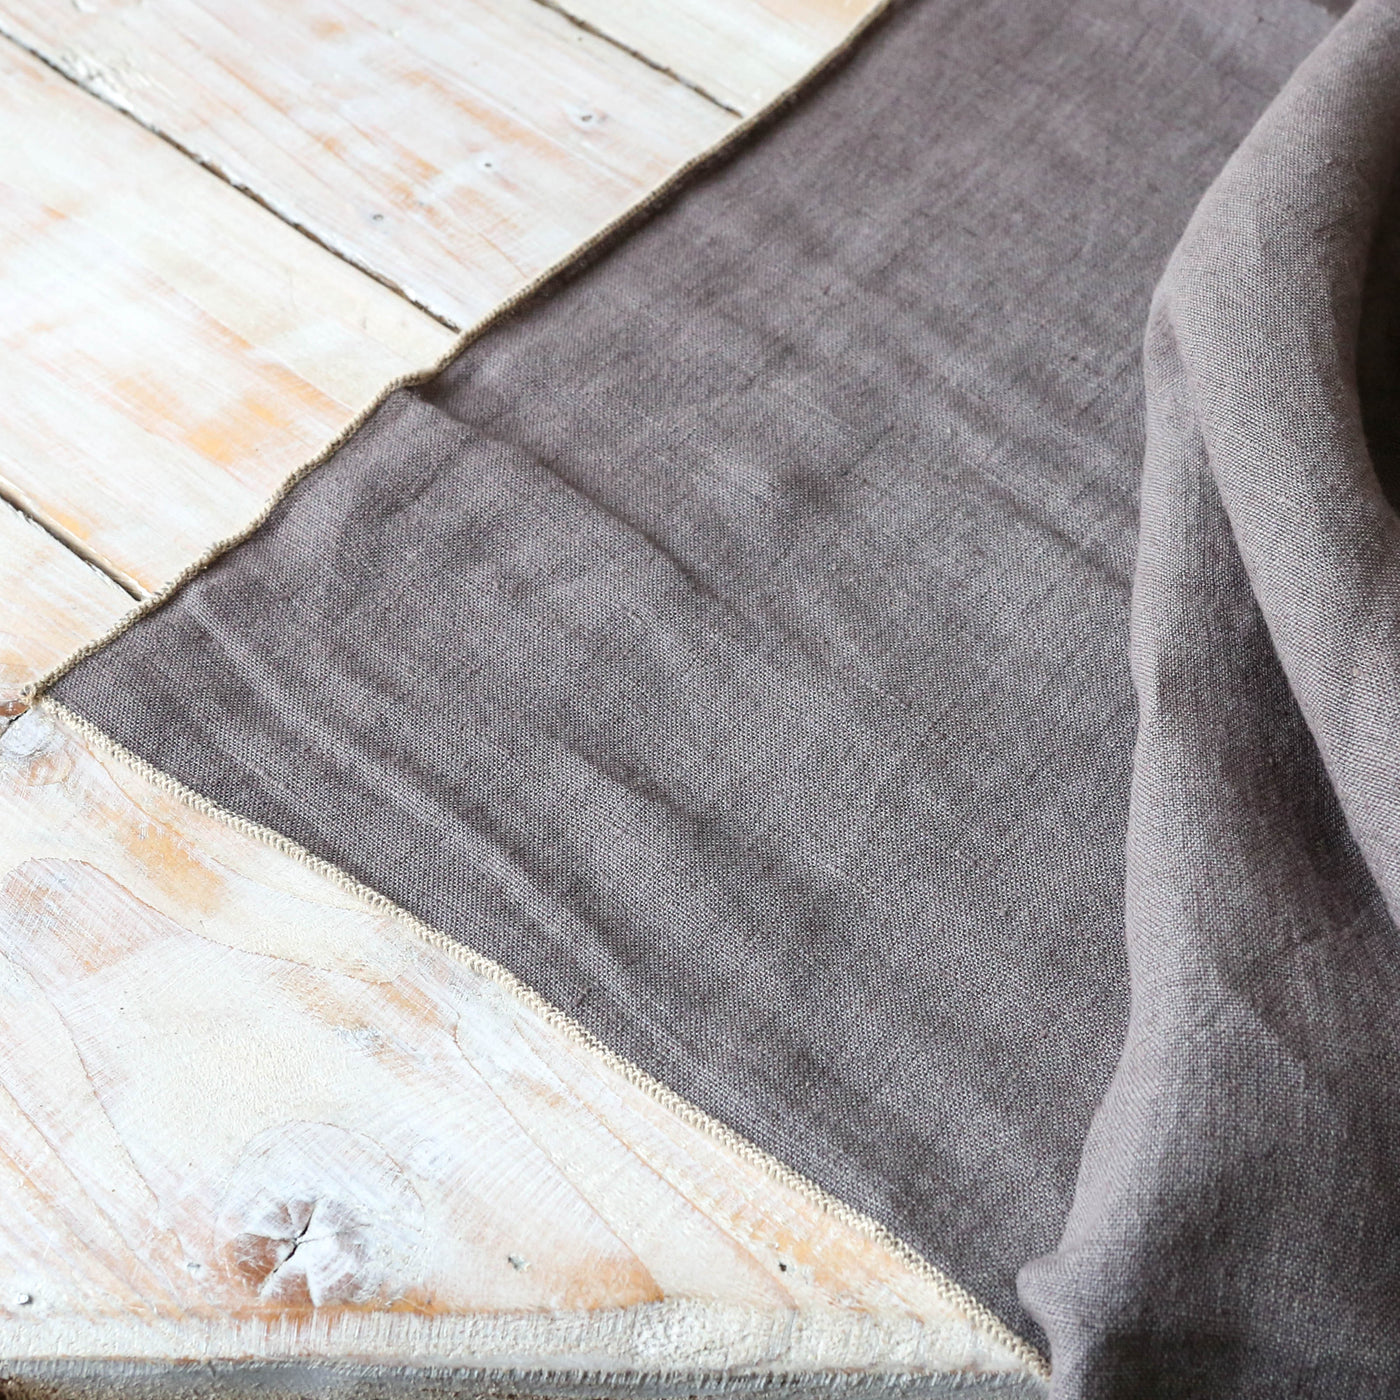 Washed Linen Tablecloth - Granite 160 x 250 cm